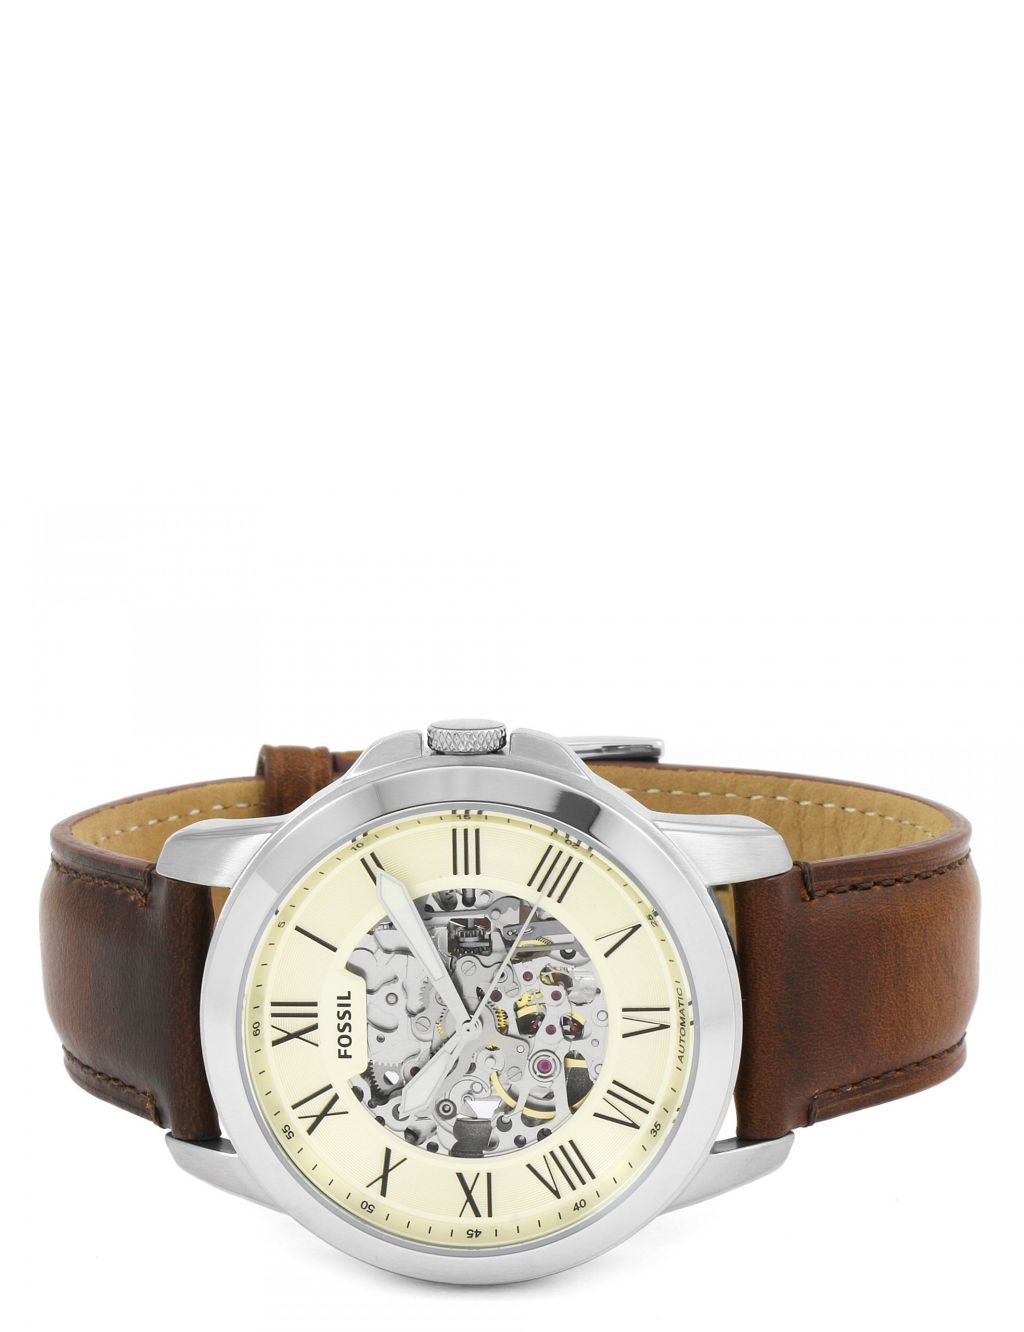 Fossil Grant Brown Leather Chronograph Automatic Watch image 4